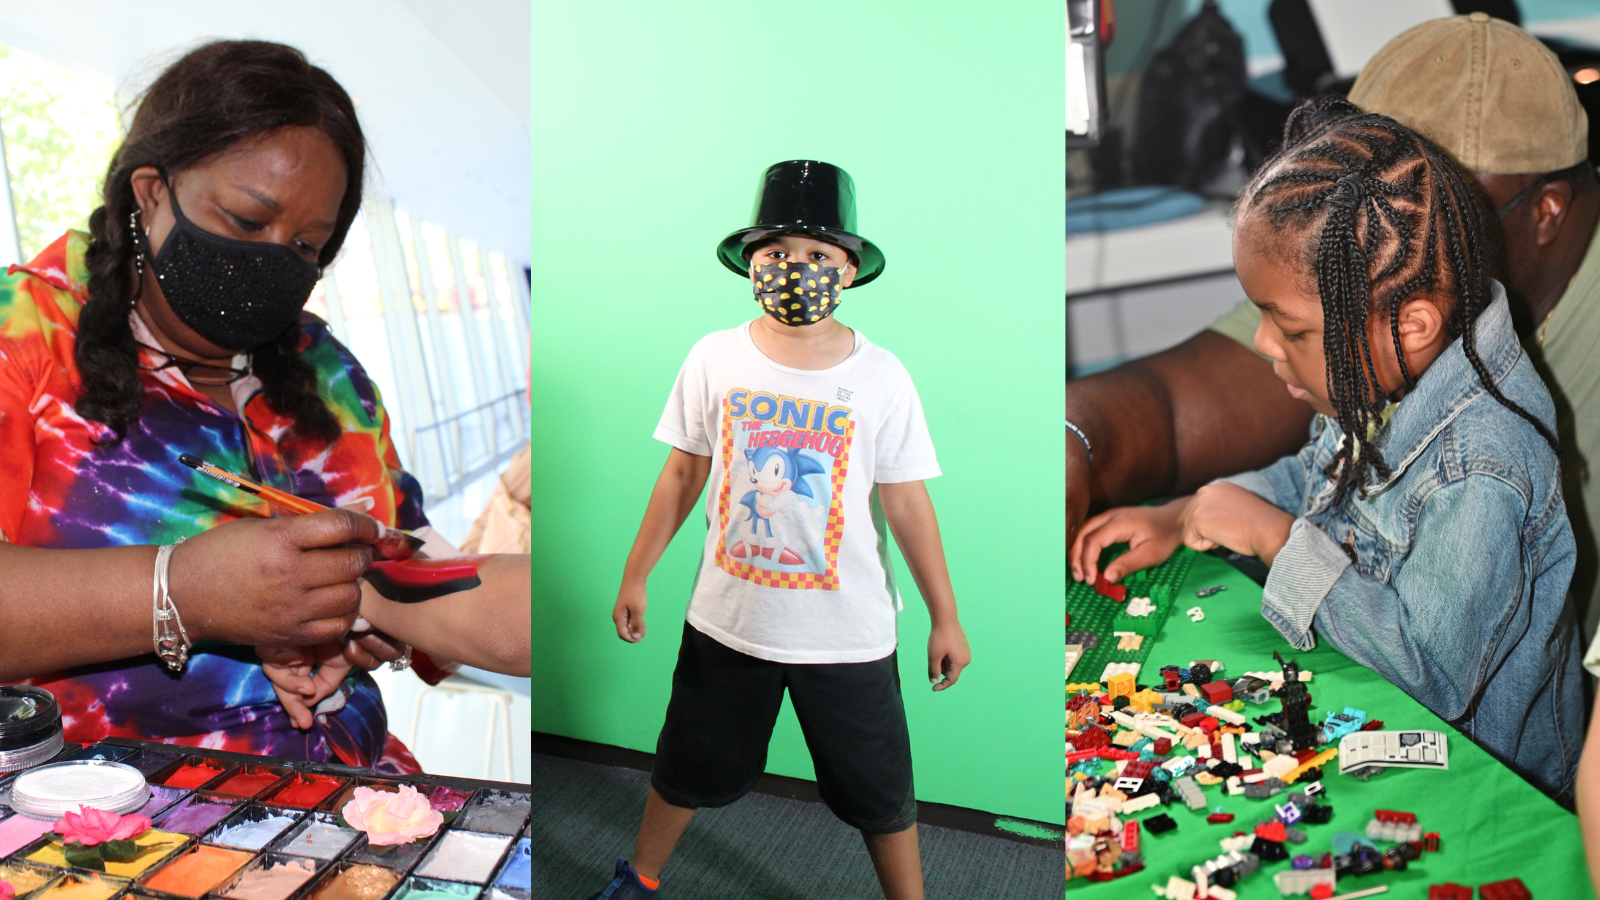 images of a black woman makeup artist painting on a child's arm, a boy in front of a green screen, and young girl playing with legos